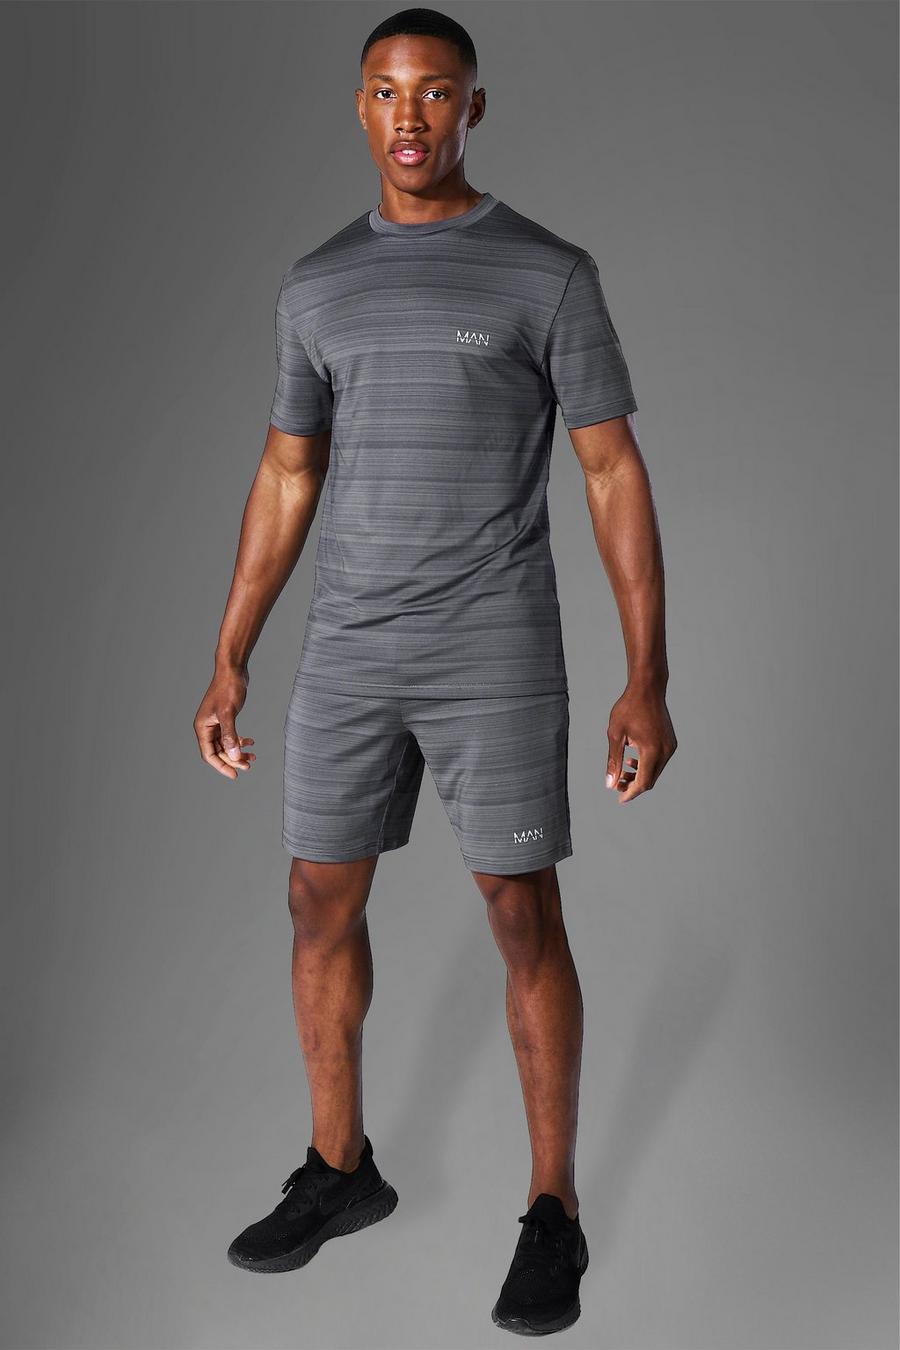 Meliertes Man Active T-Shirt und Shorts, Charcoal image number 1